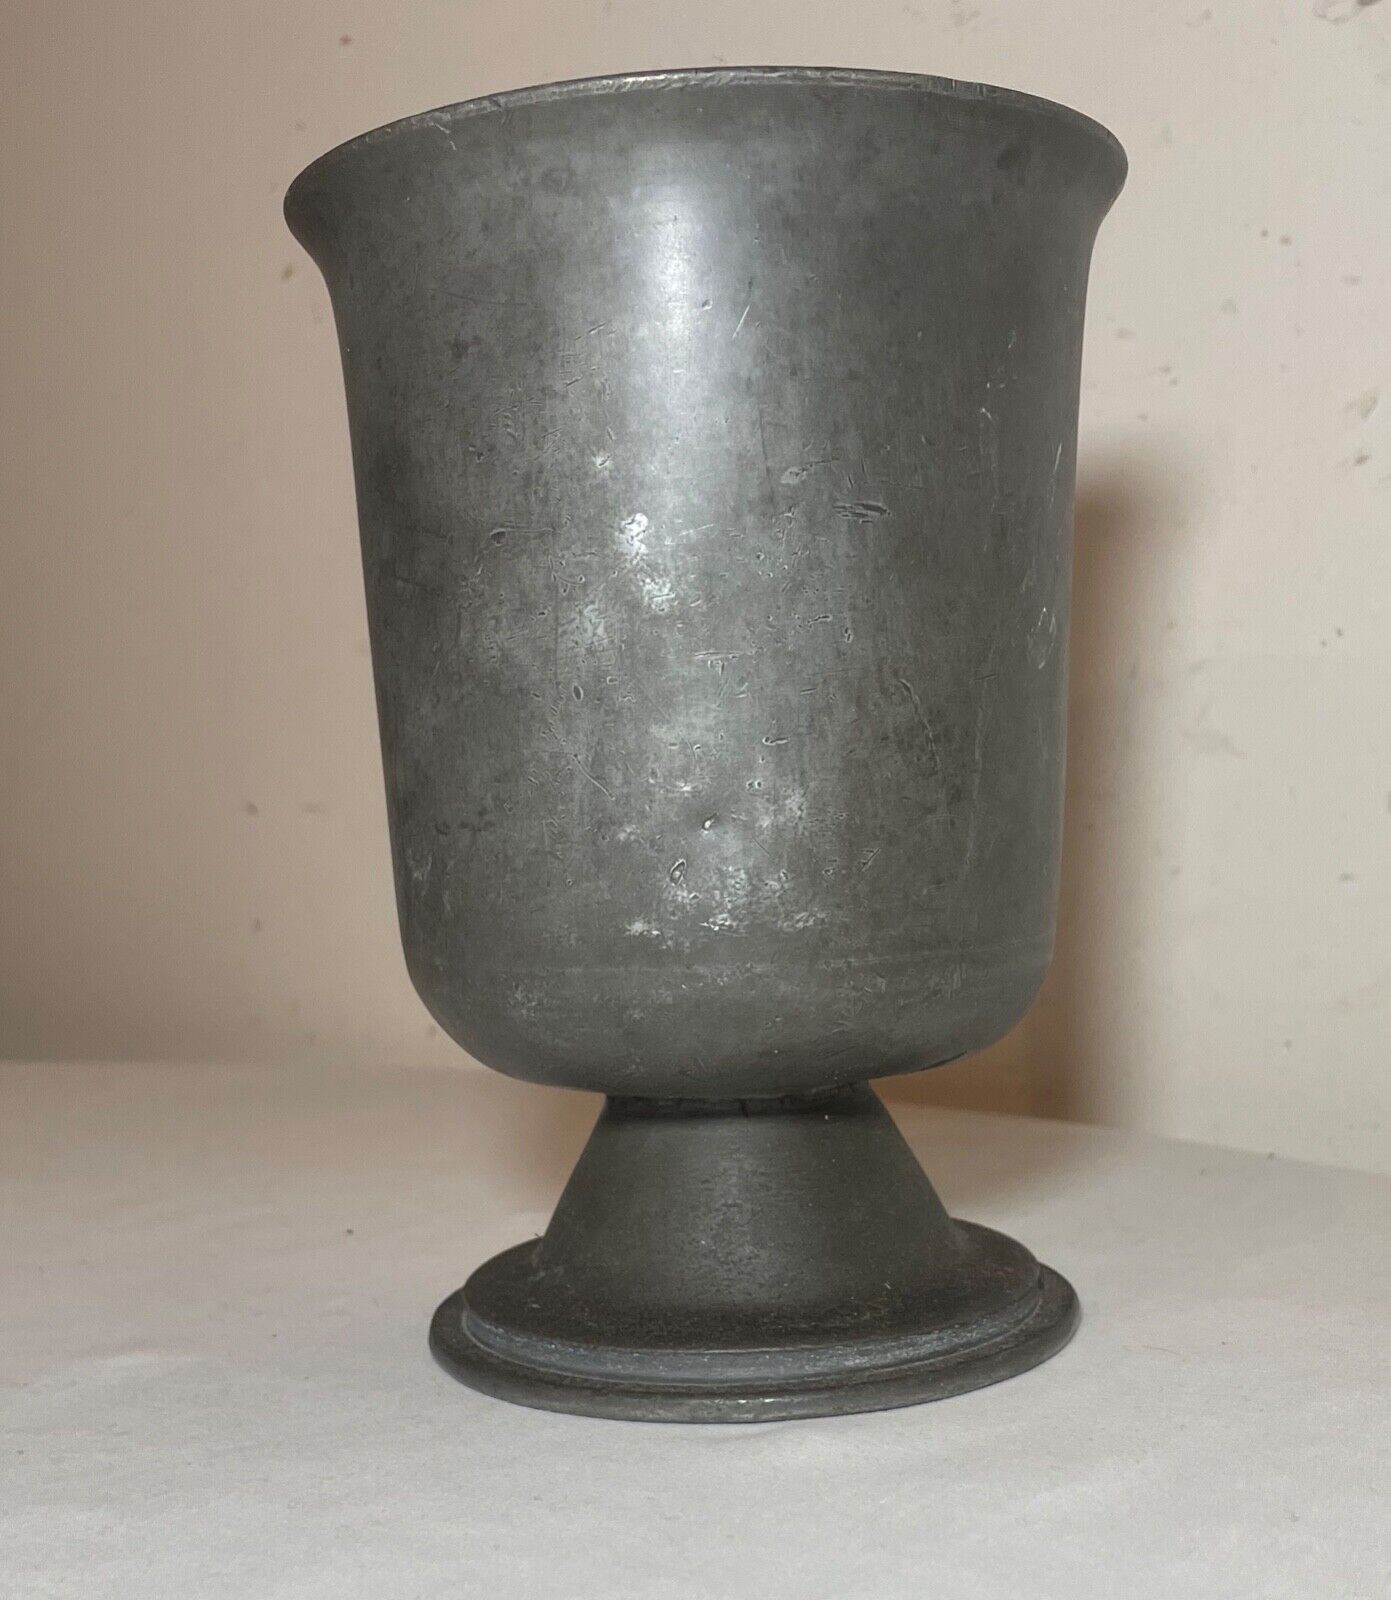 rare antique 18th century 1700s handmade English pewter footed vase chalice